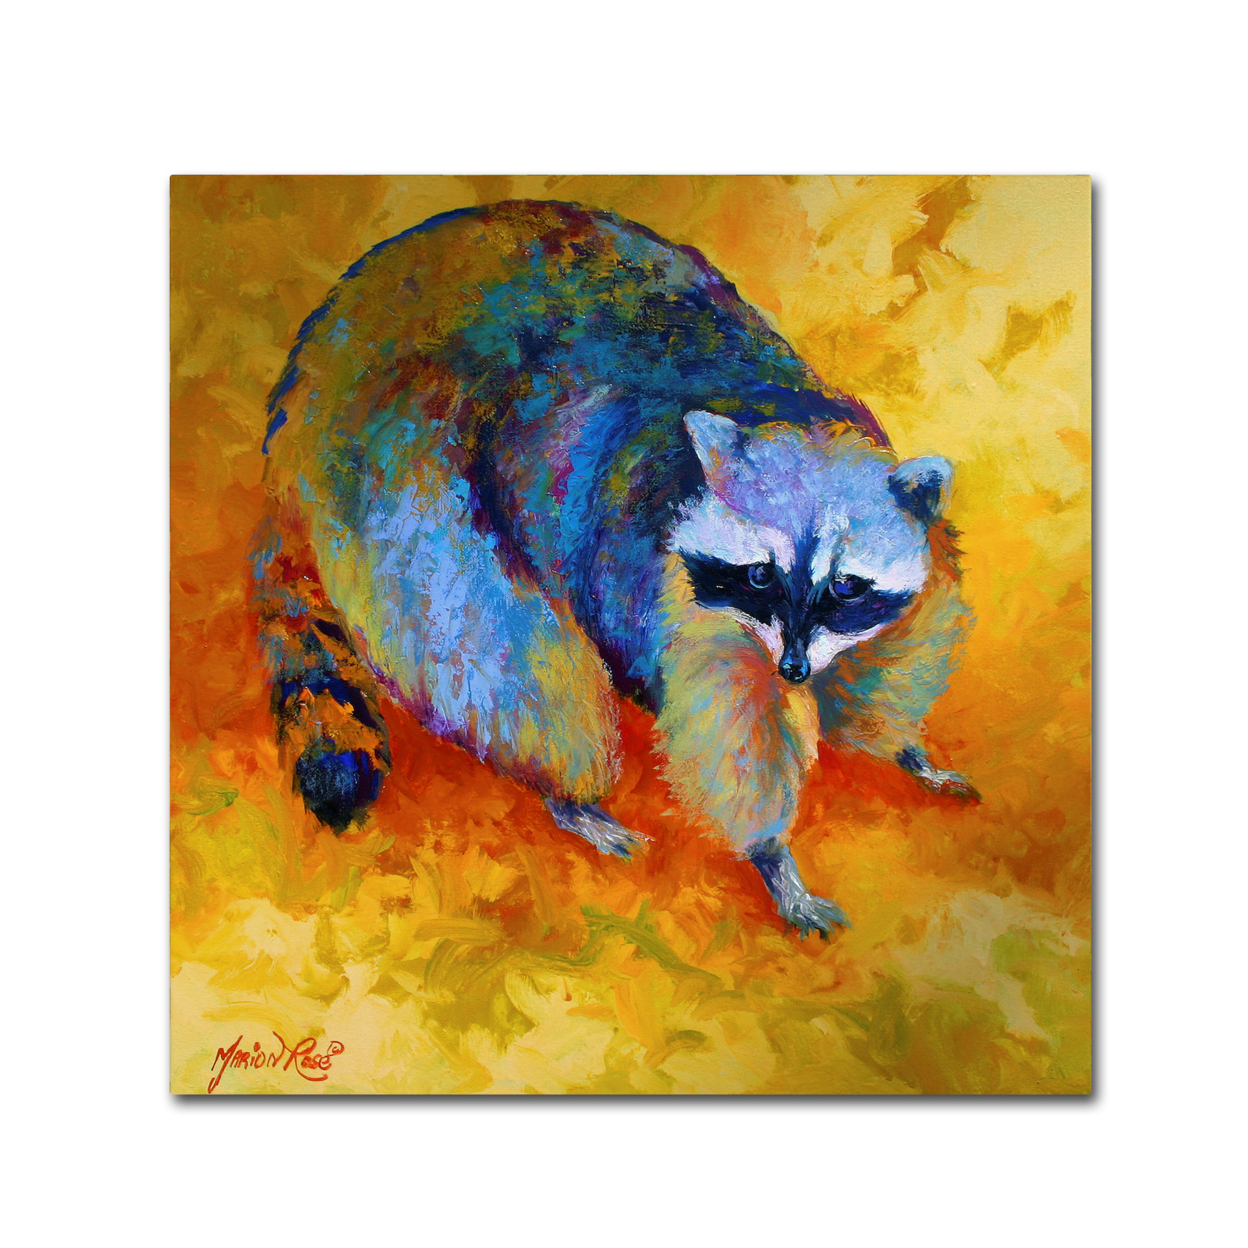 Marion Rose 'Coon' Ready To Hang Canvas Art 35 X 35 Inches Made In USA